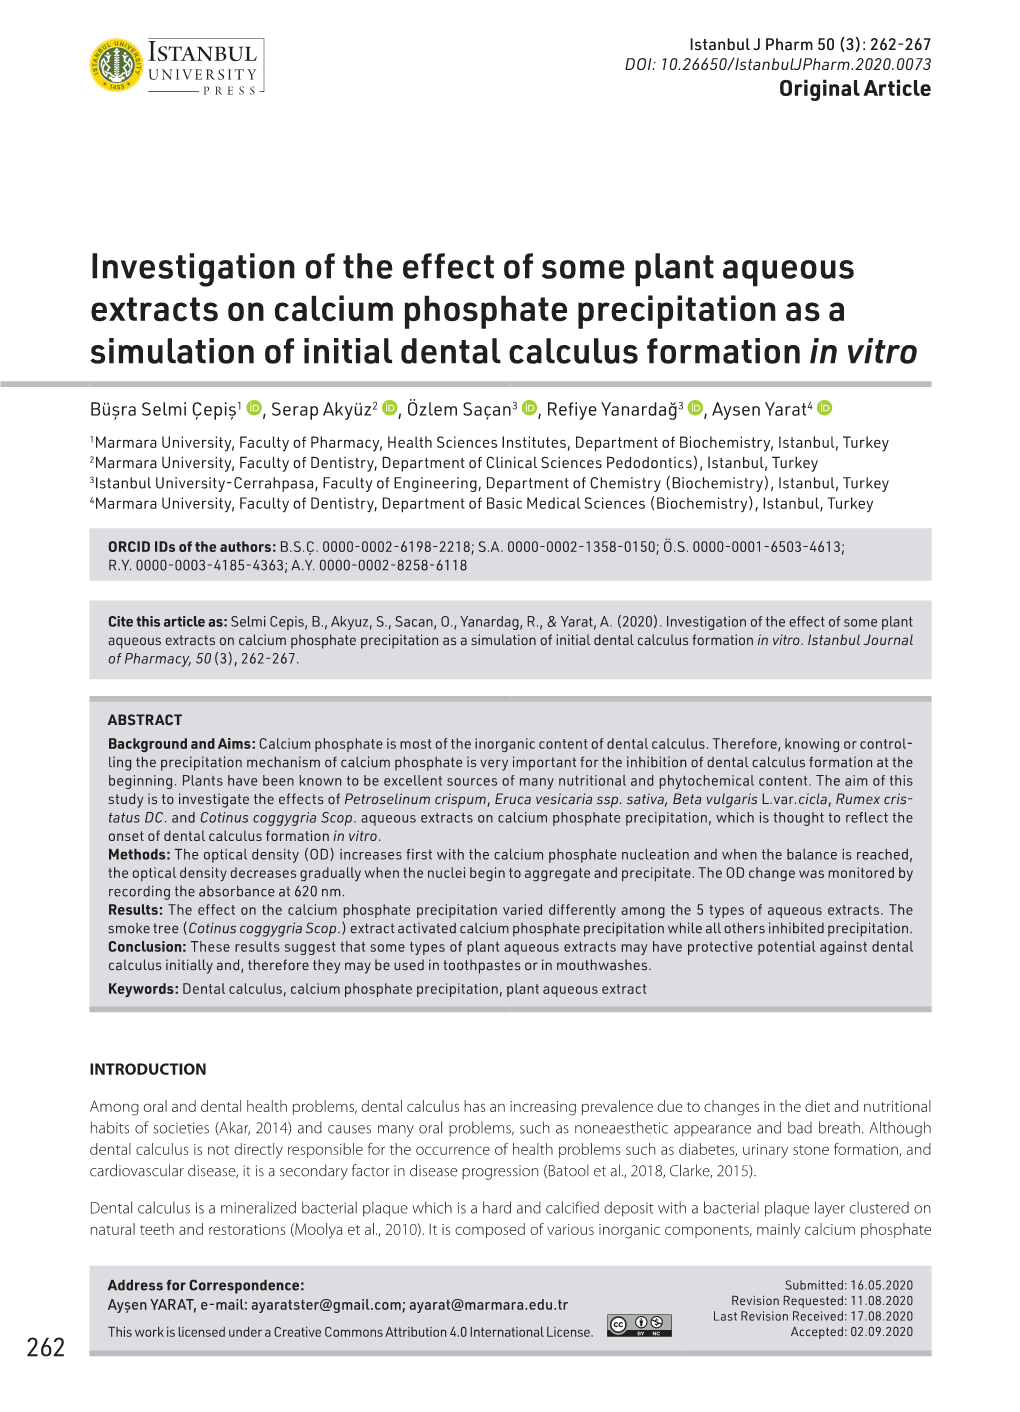 Investigation of the Effect of Some Plant Aqueous Extracts on Calcium Phosphate Precipitation As a Simulation of Initial Dental Calculus Formation in Vitro